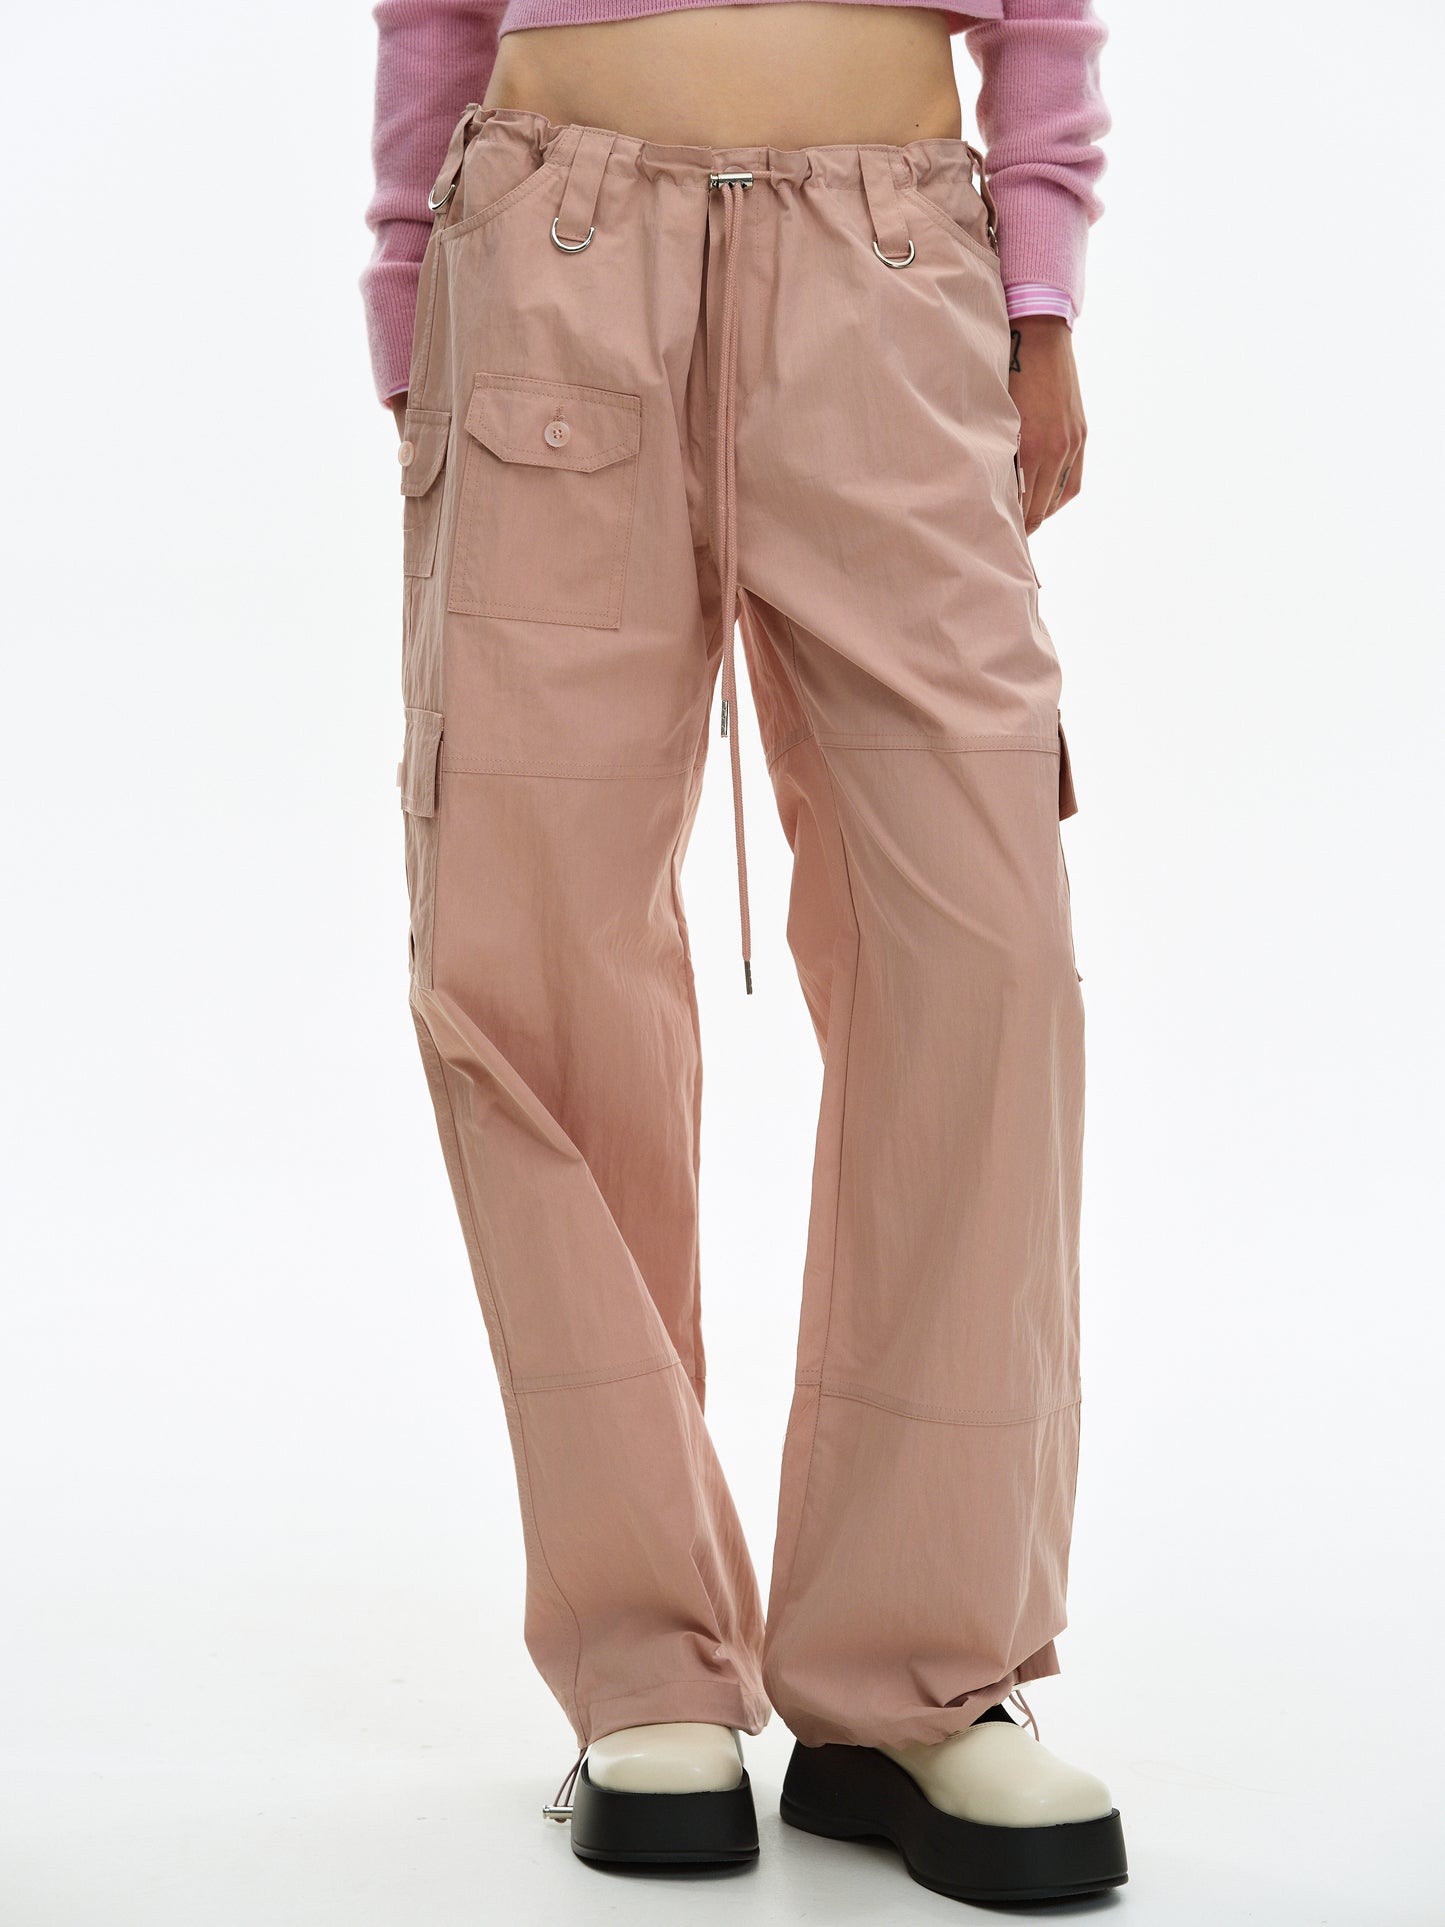 Trousers, – Cargo SourceUnknown Parachute Dusty Pink